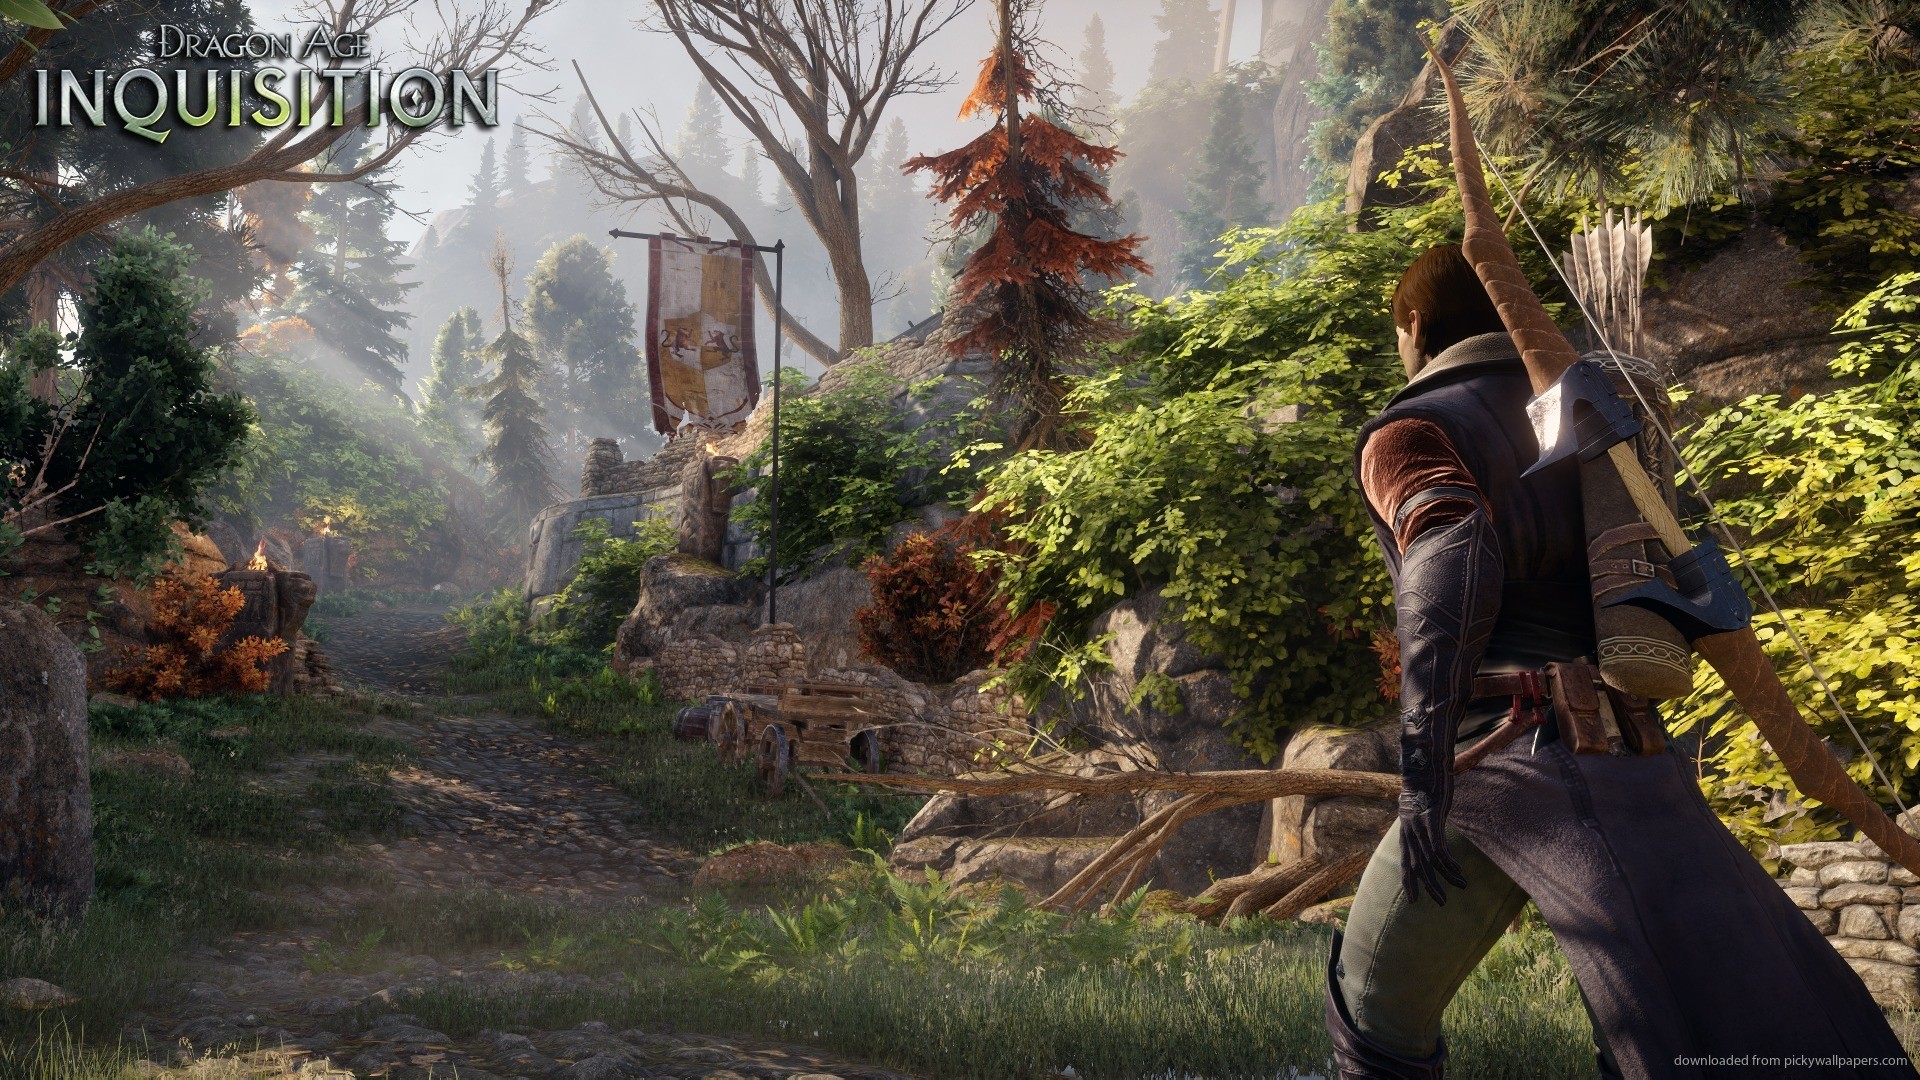 1920x1080 Dragon Age Inquisition Game HD Wallpaper picture